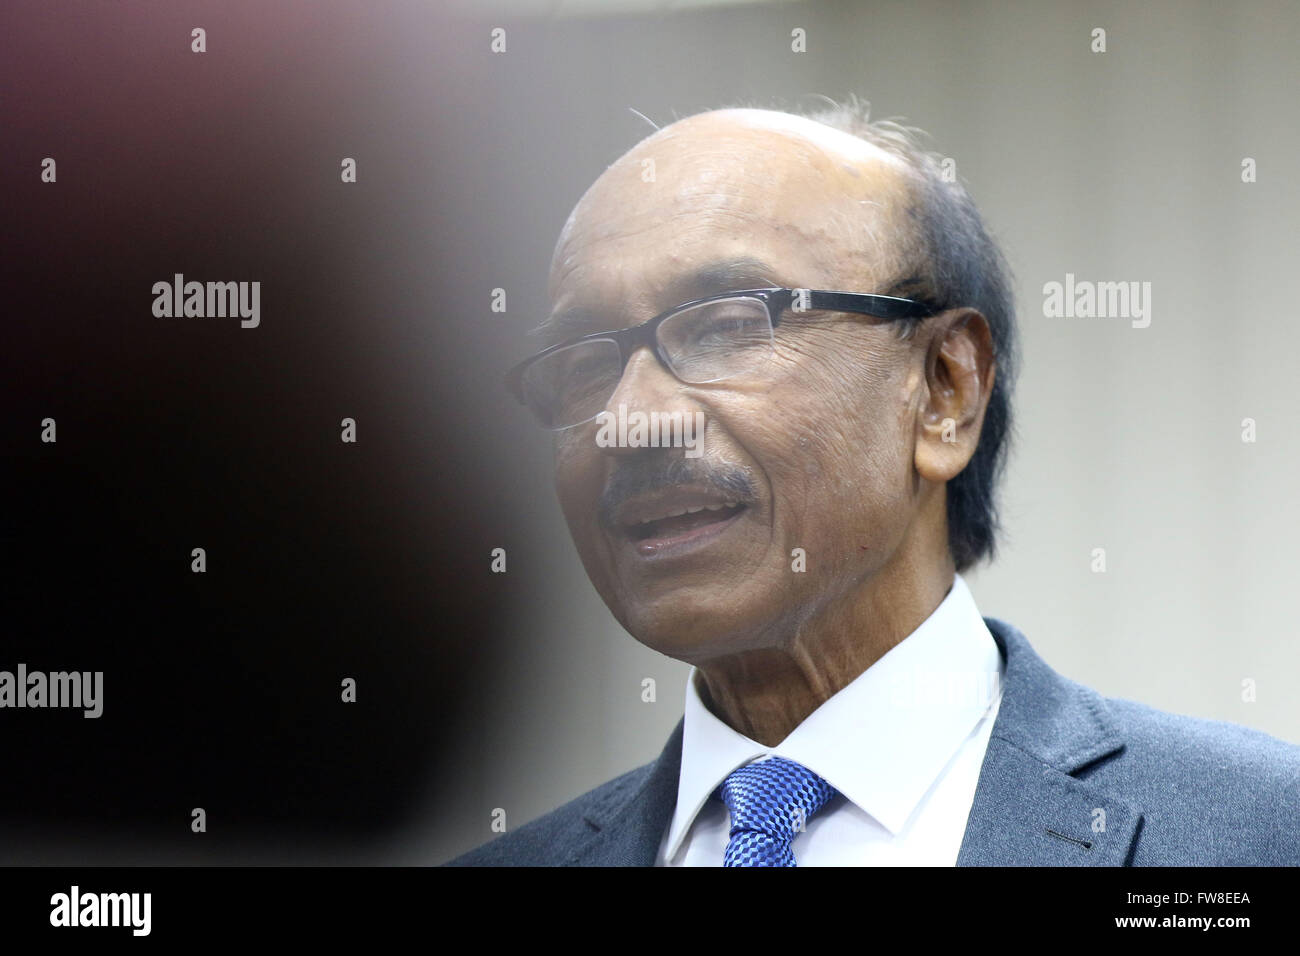 Dhaka 20 March 2016. The newly appointed governor of Bangladesh Bank Fazle Kabir is talking with the press on his first day at his office at the central bank of Bangladesh. The government on March 16 appointed him as the new governor of Bangladesh Bank after the central bank’s $101 million cyber heist. Stock Photo